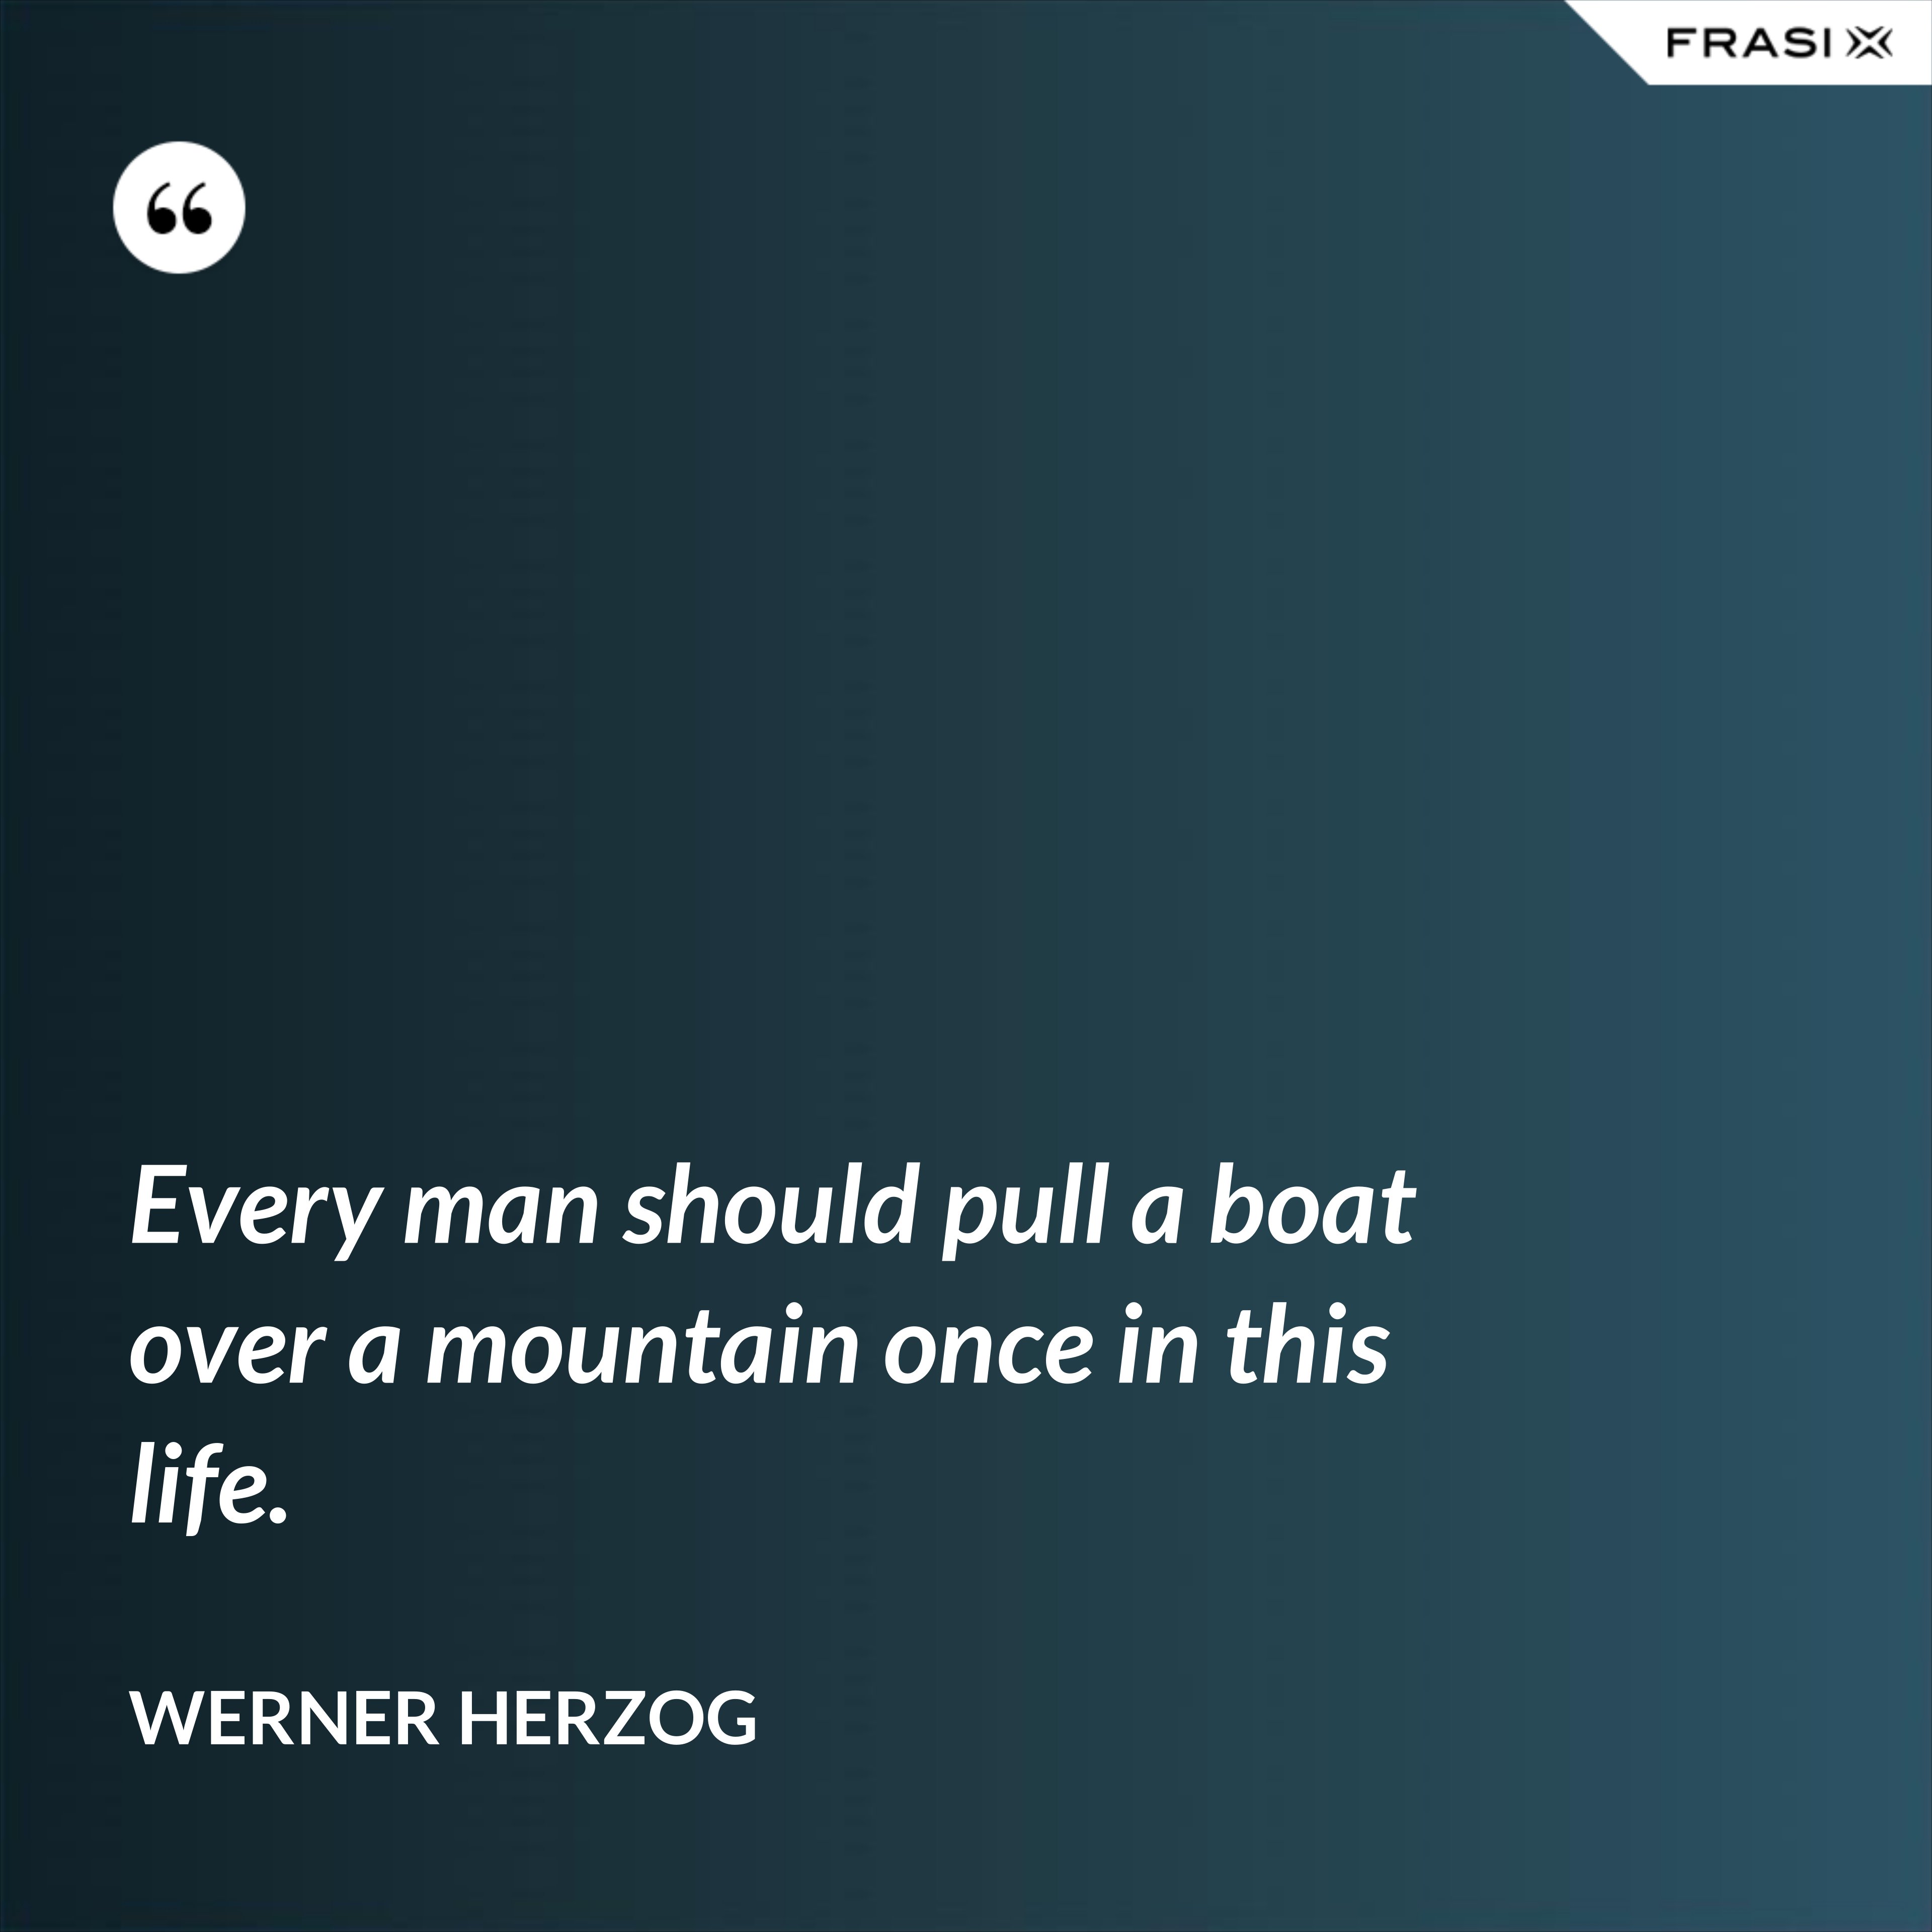 Every man should pull a boat over a mountain once in this life. - Werner Herzog